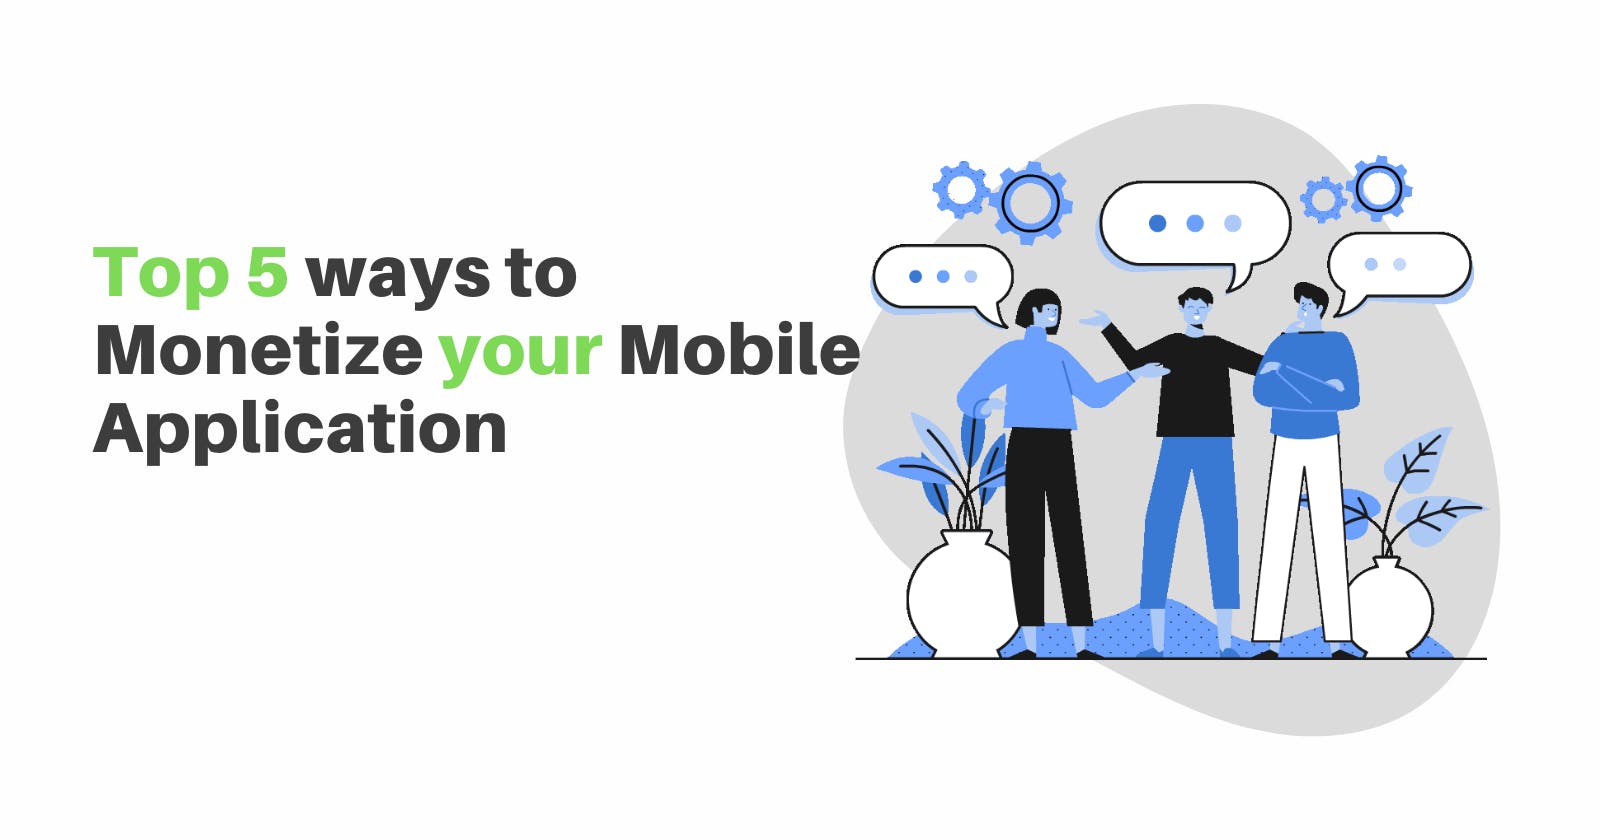 Top 5 ways to monetize your mobile application